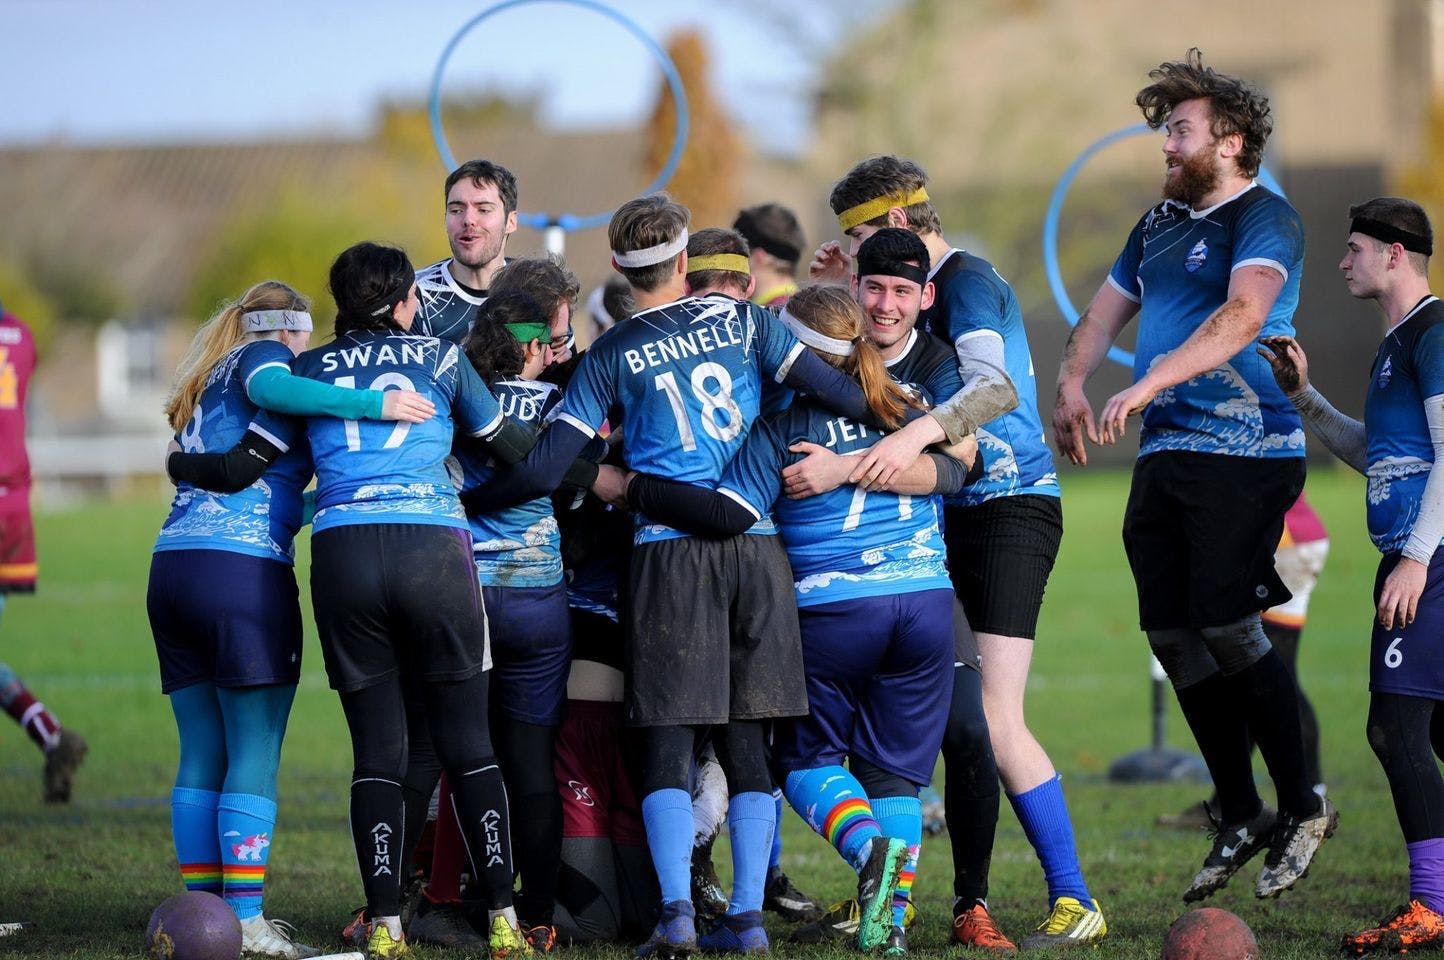 Southsea Quidditch celebrate in a group hug after winning a match